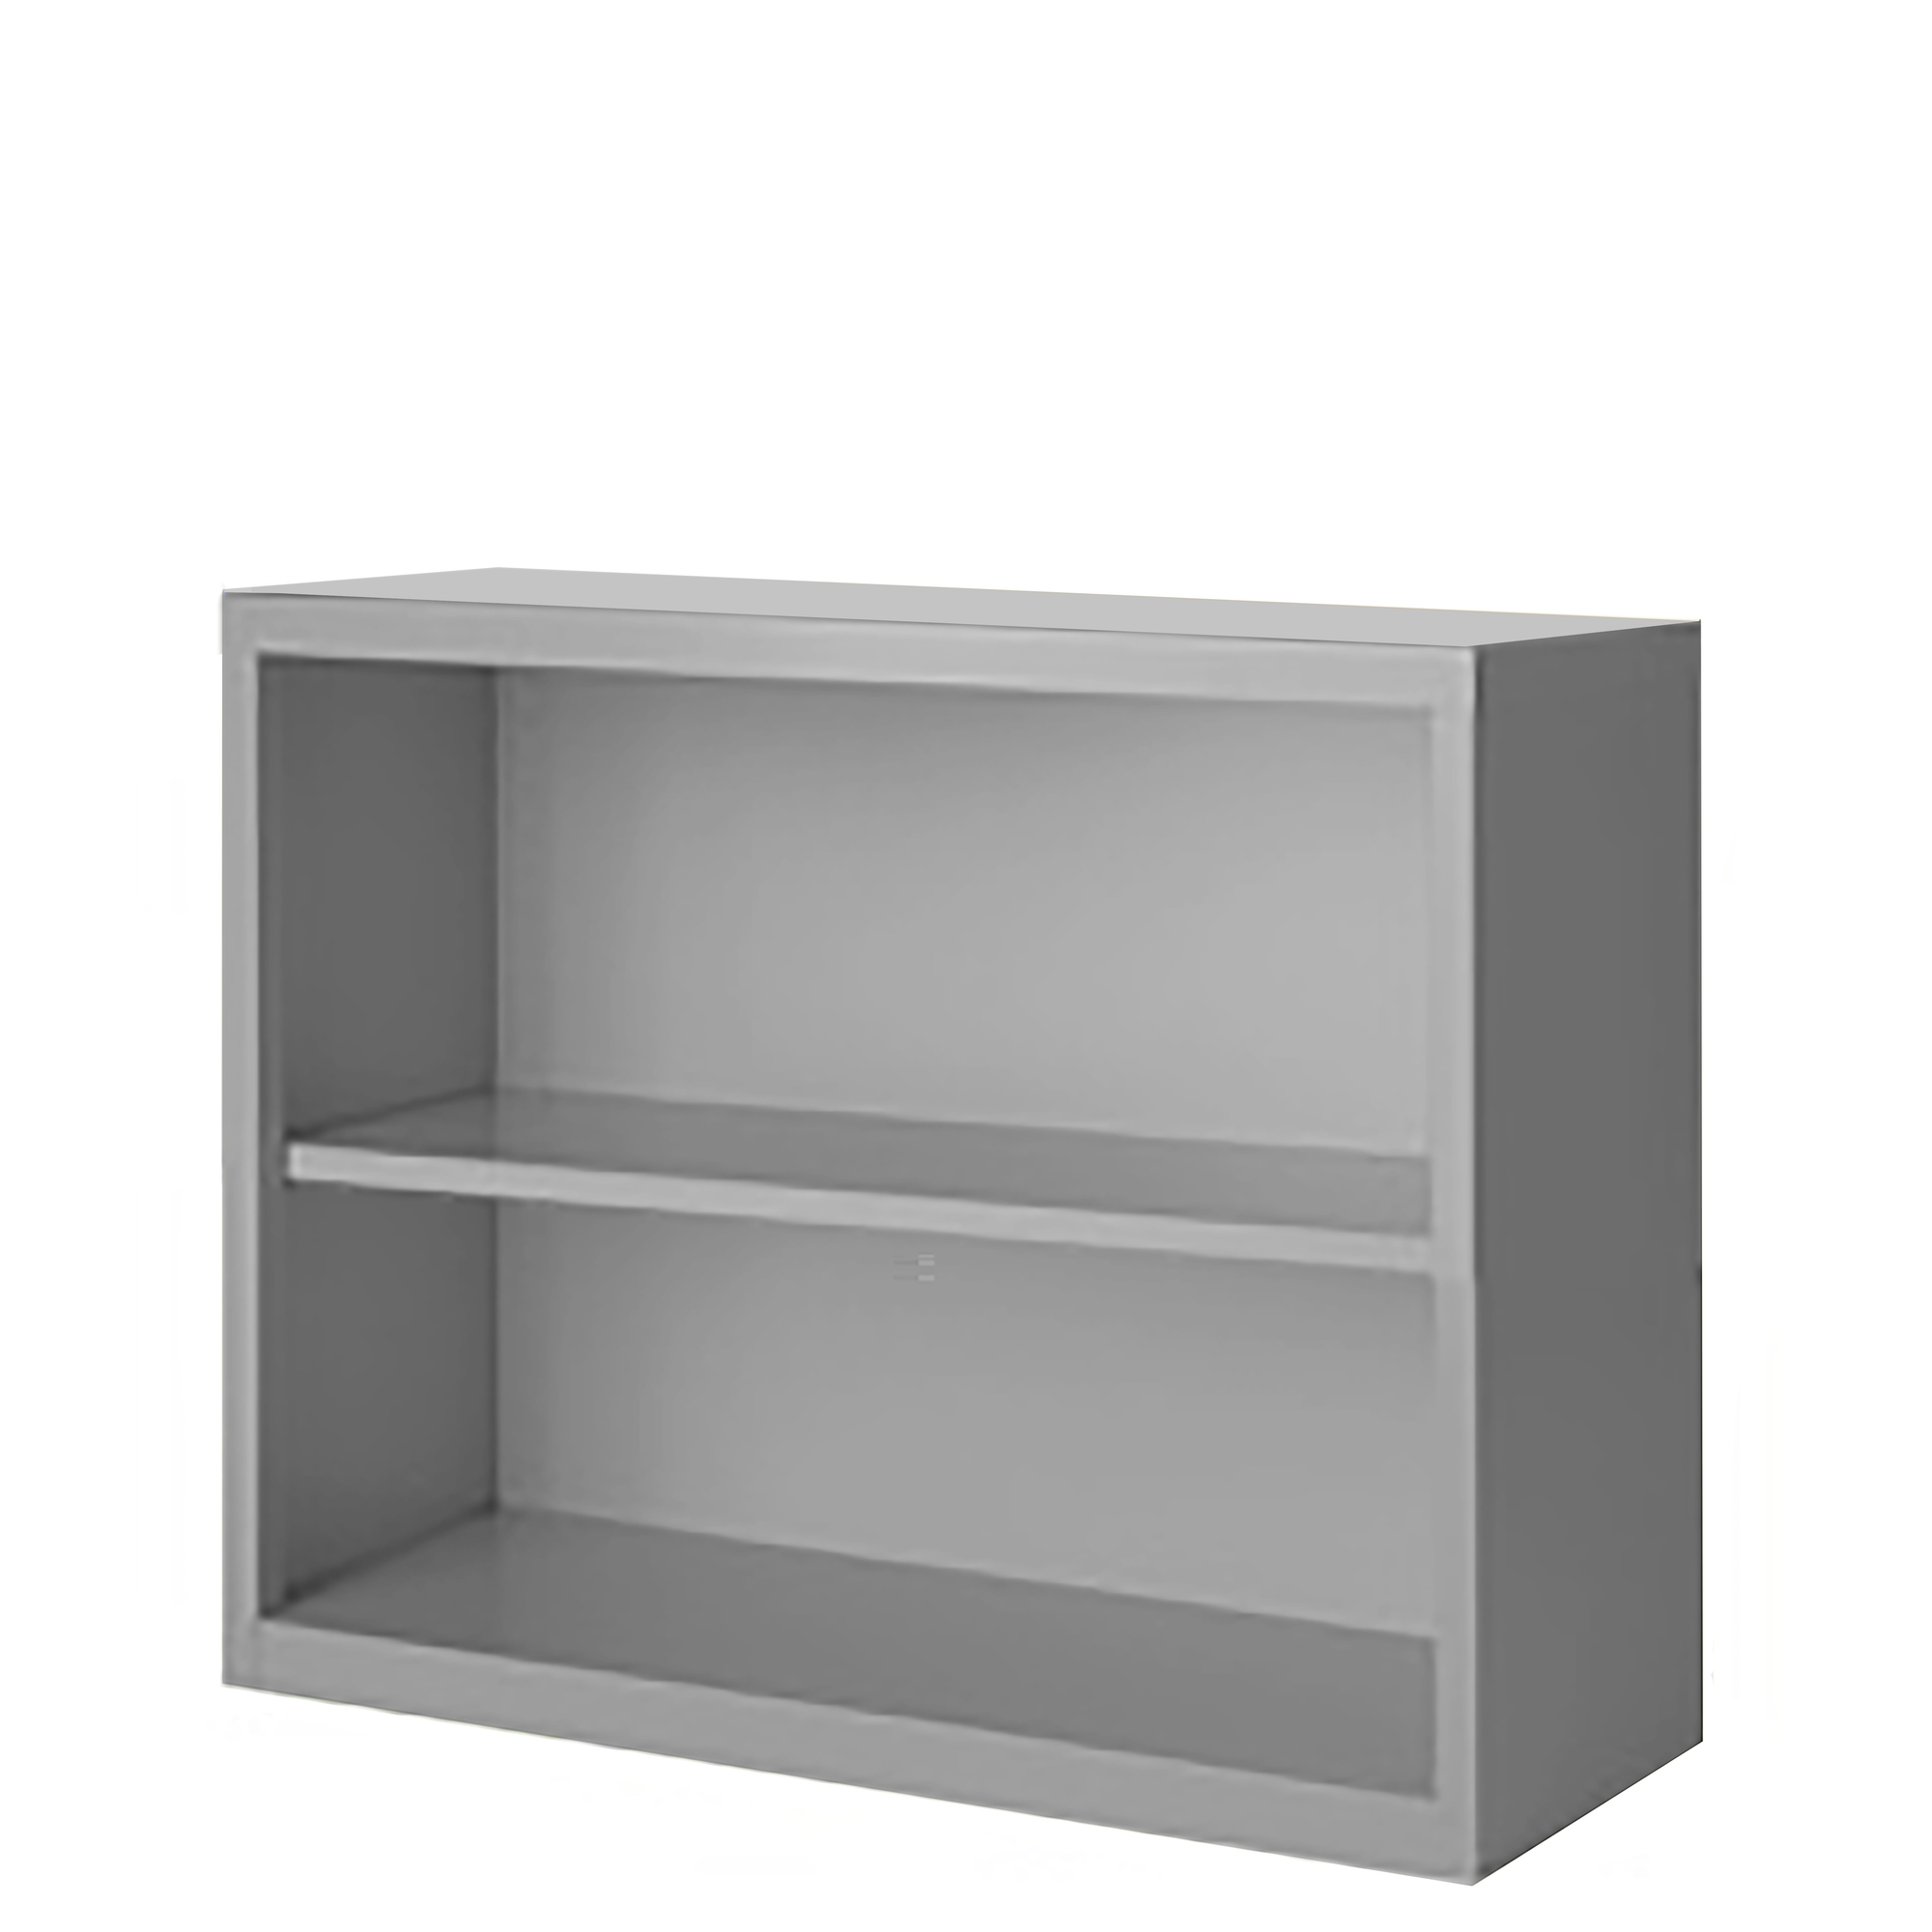 Steel Cabinets USA, 36Inchx18Inchx30Inch Gray Bookcase Steel Fully Assembled, Height 30 in, Shelves (qty.) 2, Material Steel, Model BCA-363018-G